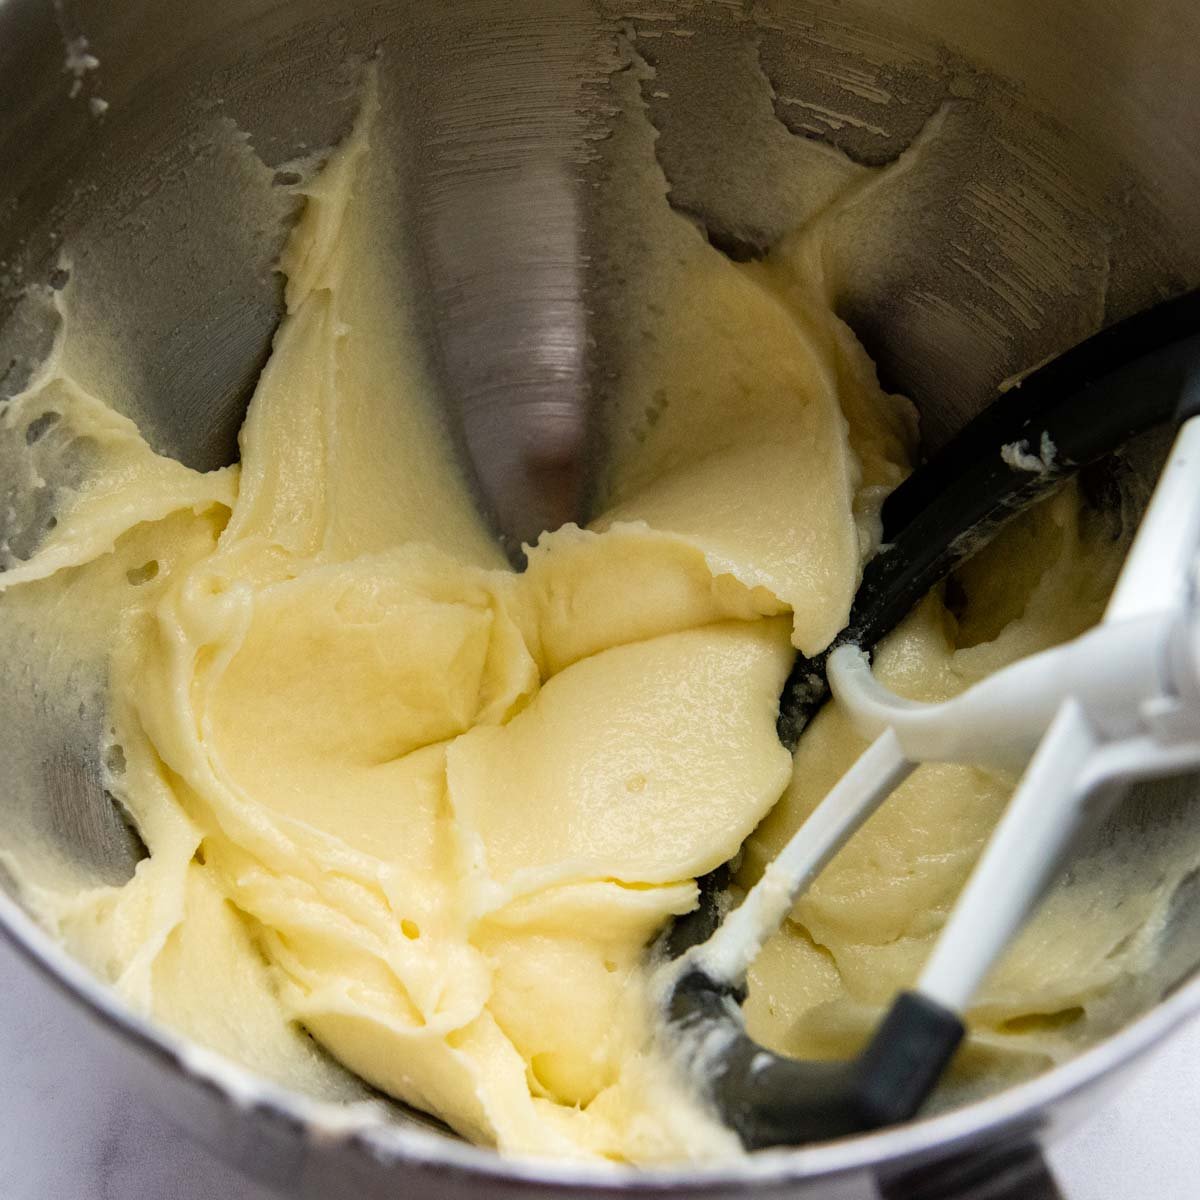 the pound cake mixture after the butter, cream cheese and sugar has been mixed.